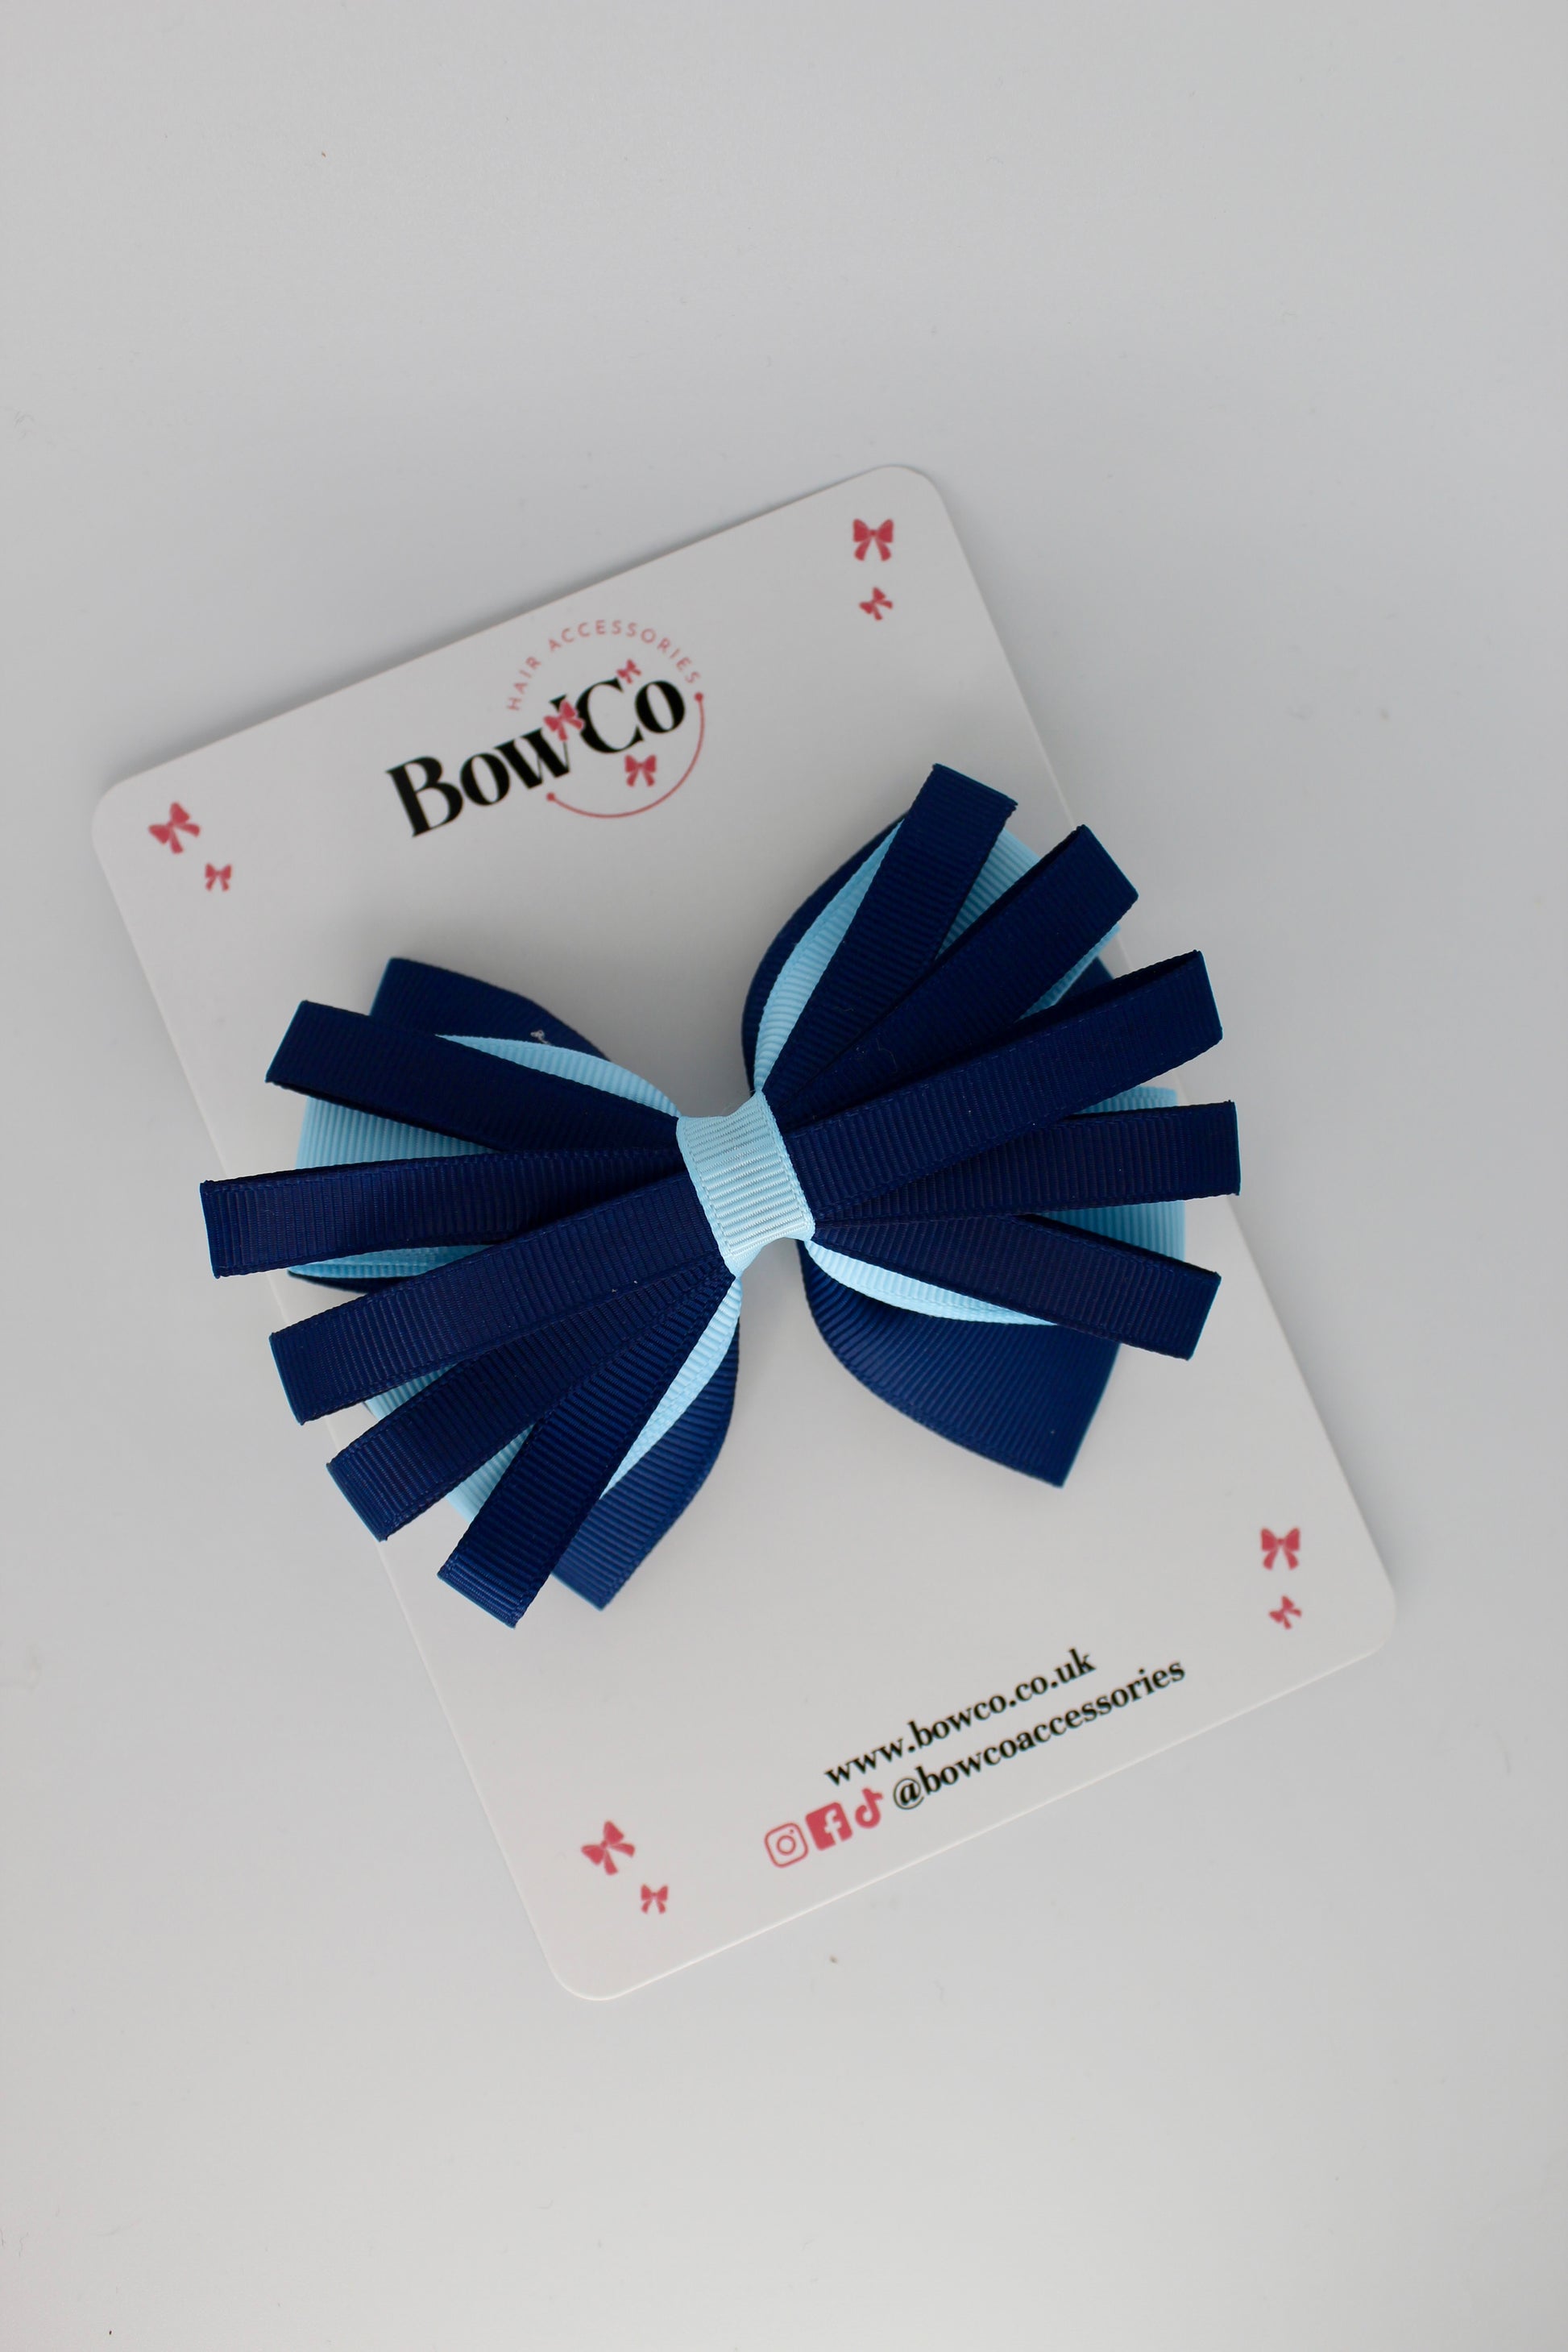 4 Inch Spiral Bow - 4 Inches - Clip - Navy Blue and Blue Topaz